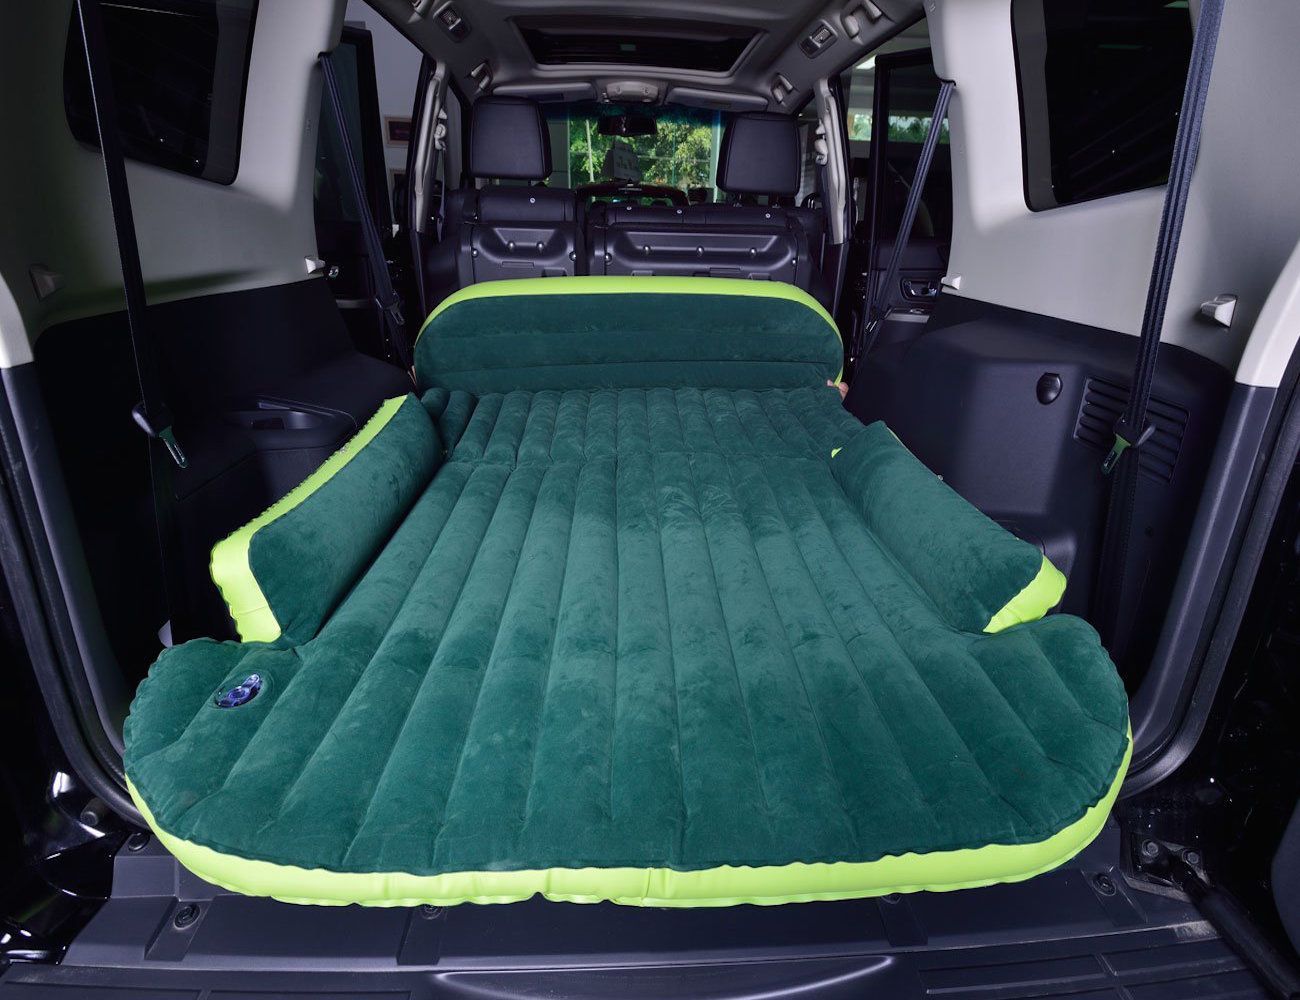 Heading for a camping trip in an SUV? Forget about carrying a separate tent or a sleeping bag if you have the SUV Air Bed.